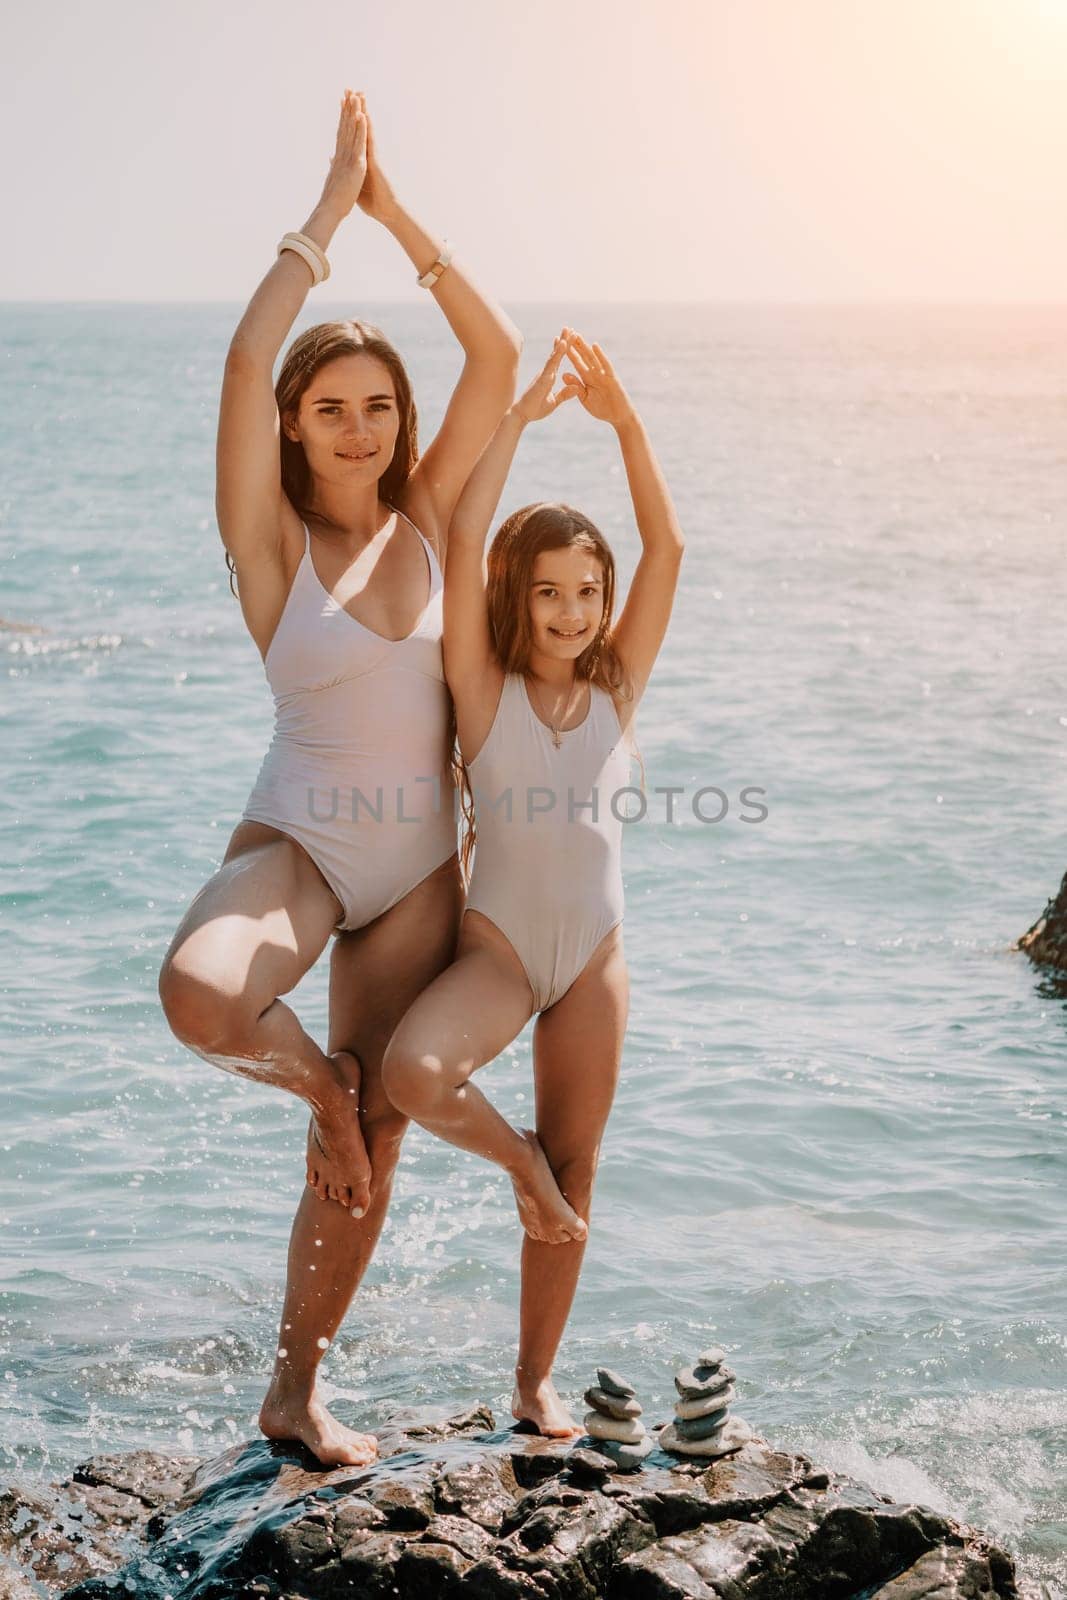 Silhouette mother and daughter doing yoga at beach. Woman on yoga mat in beach meditation, mental health training or mind wellness by ocean, sea